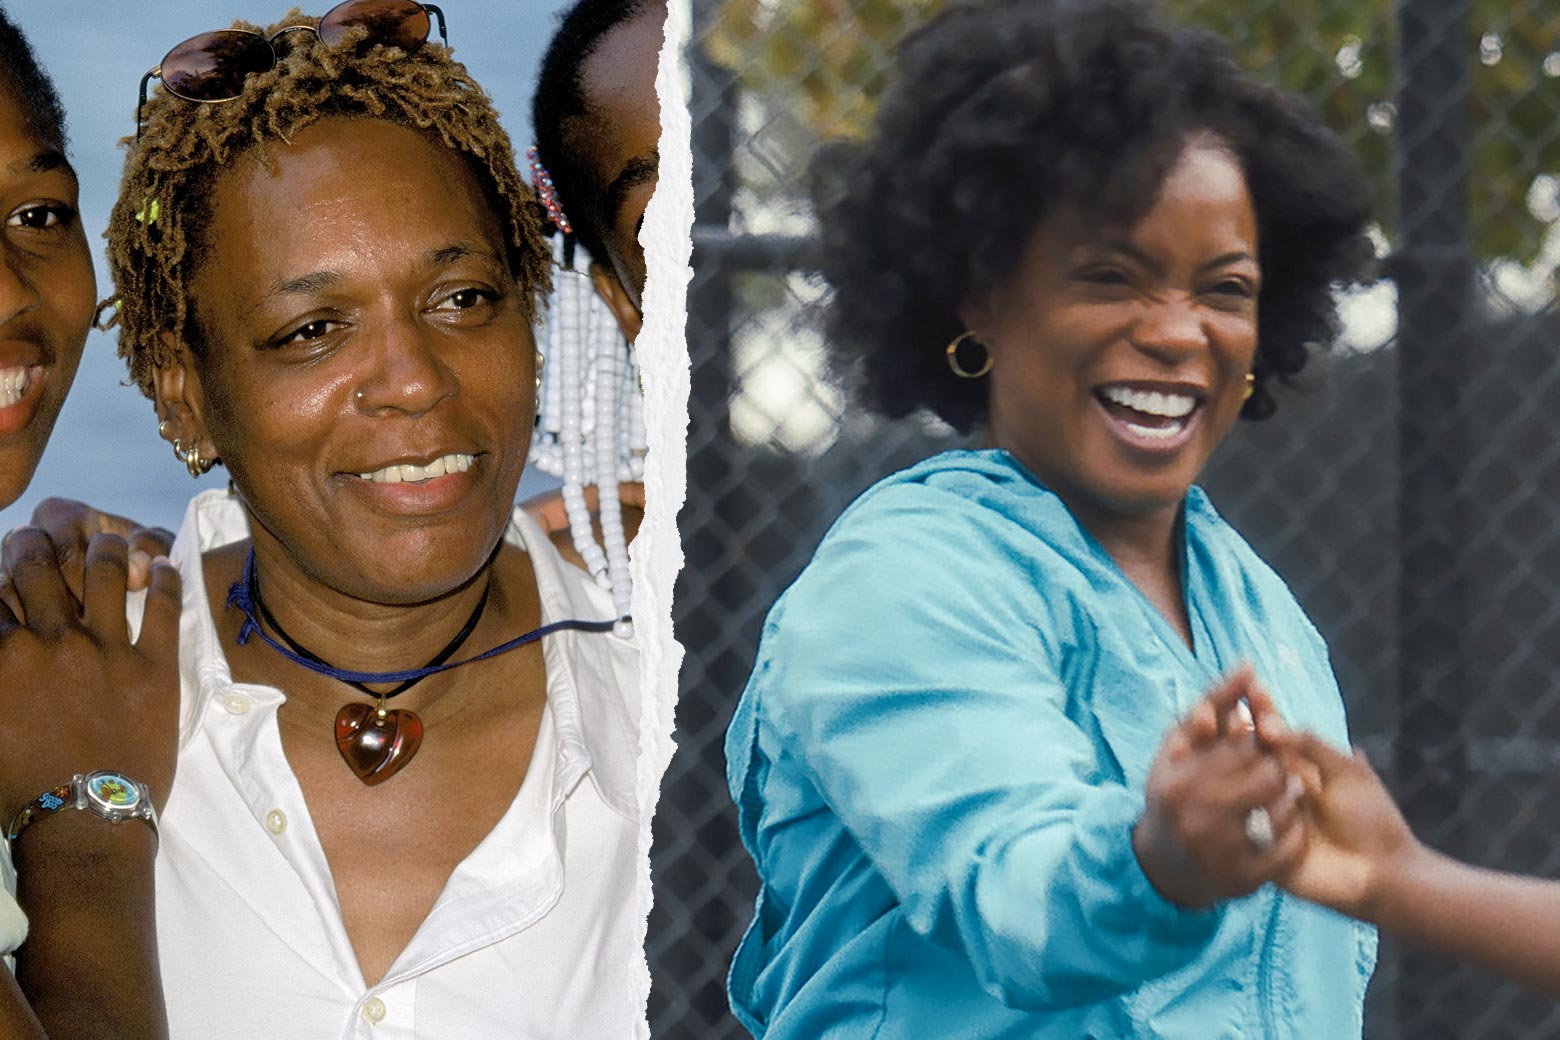 She wears a big smile in both photos, surrounded by her daughters